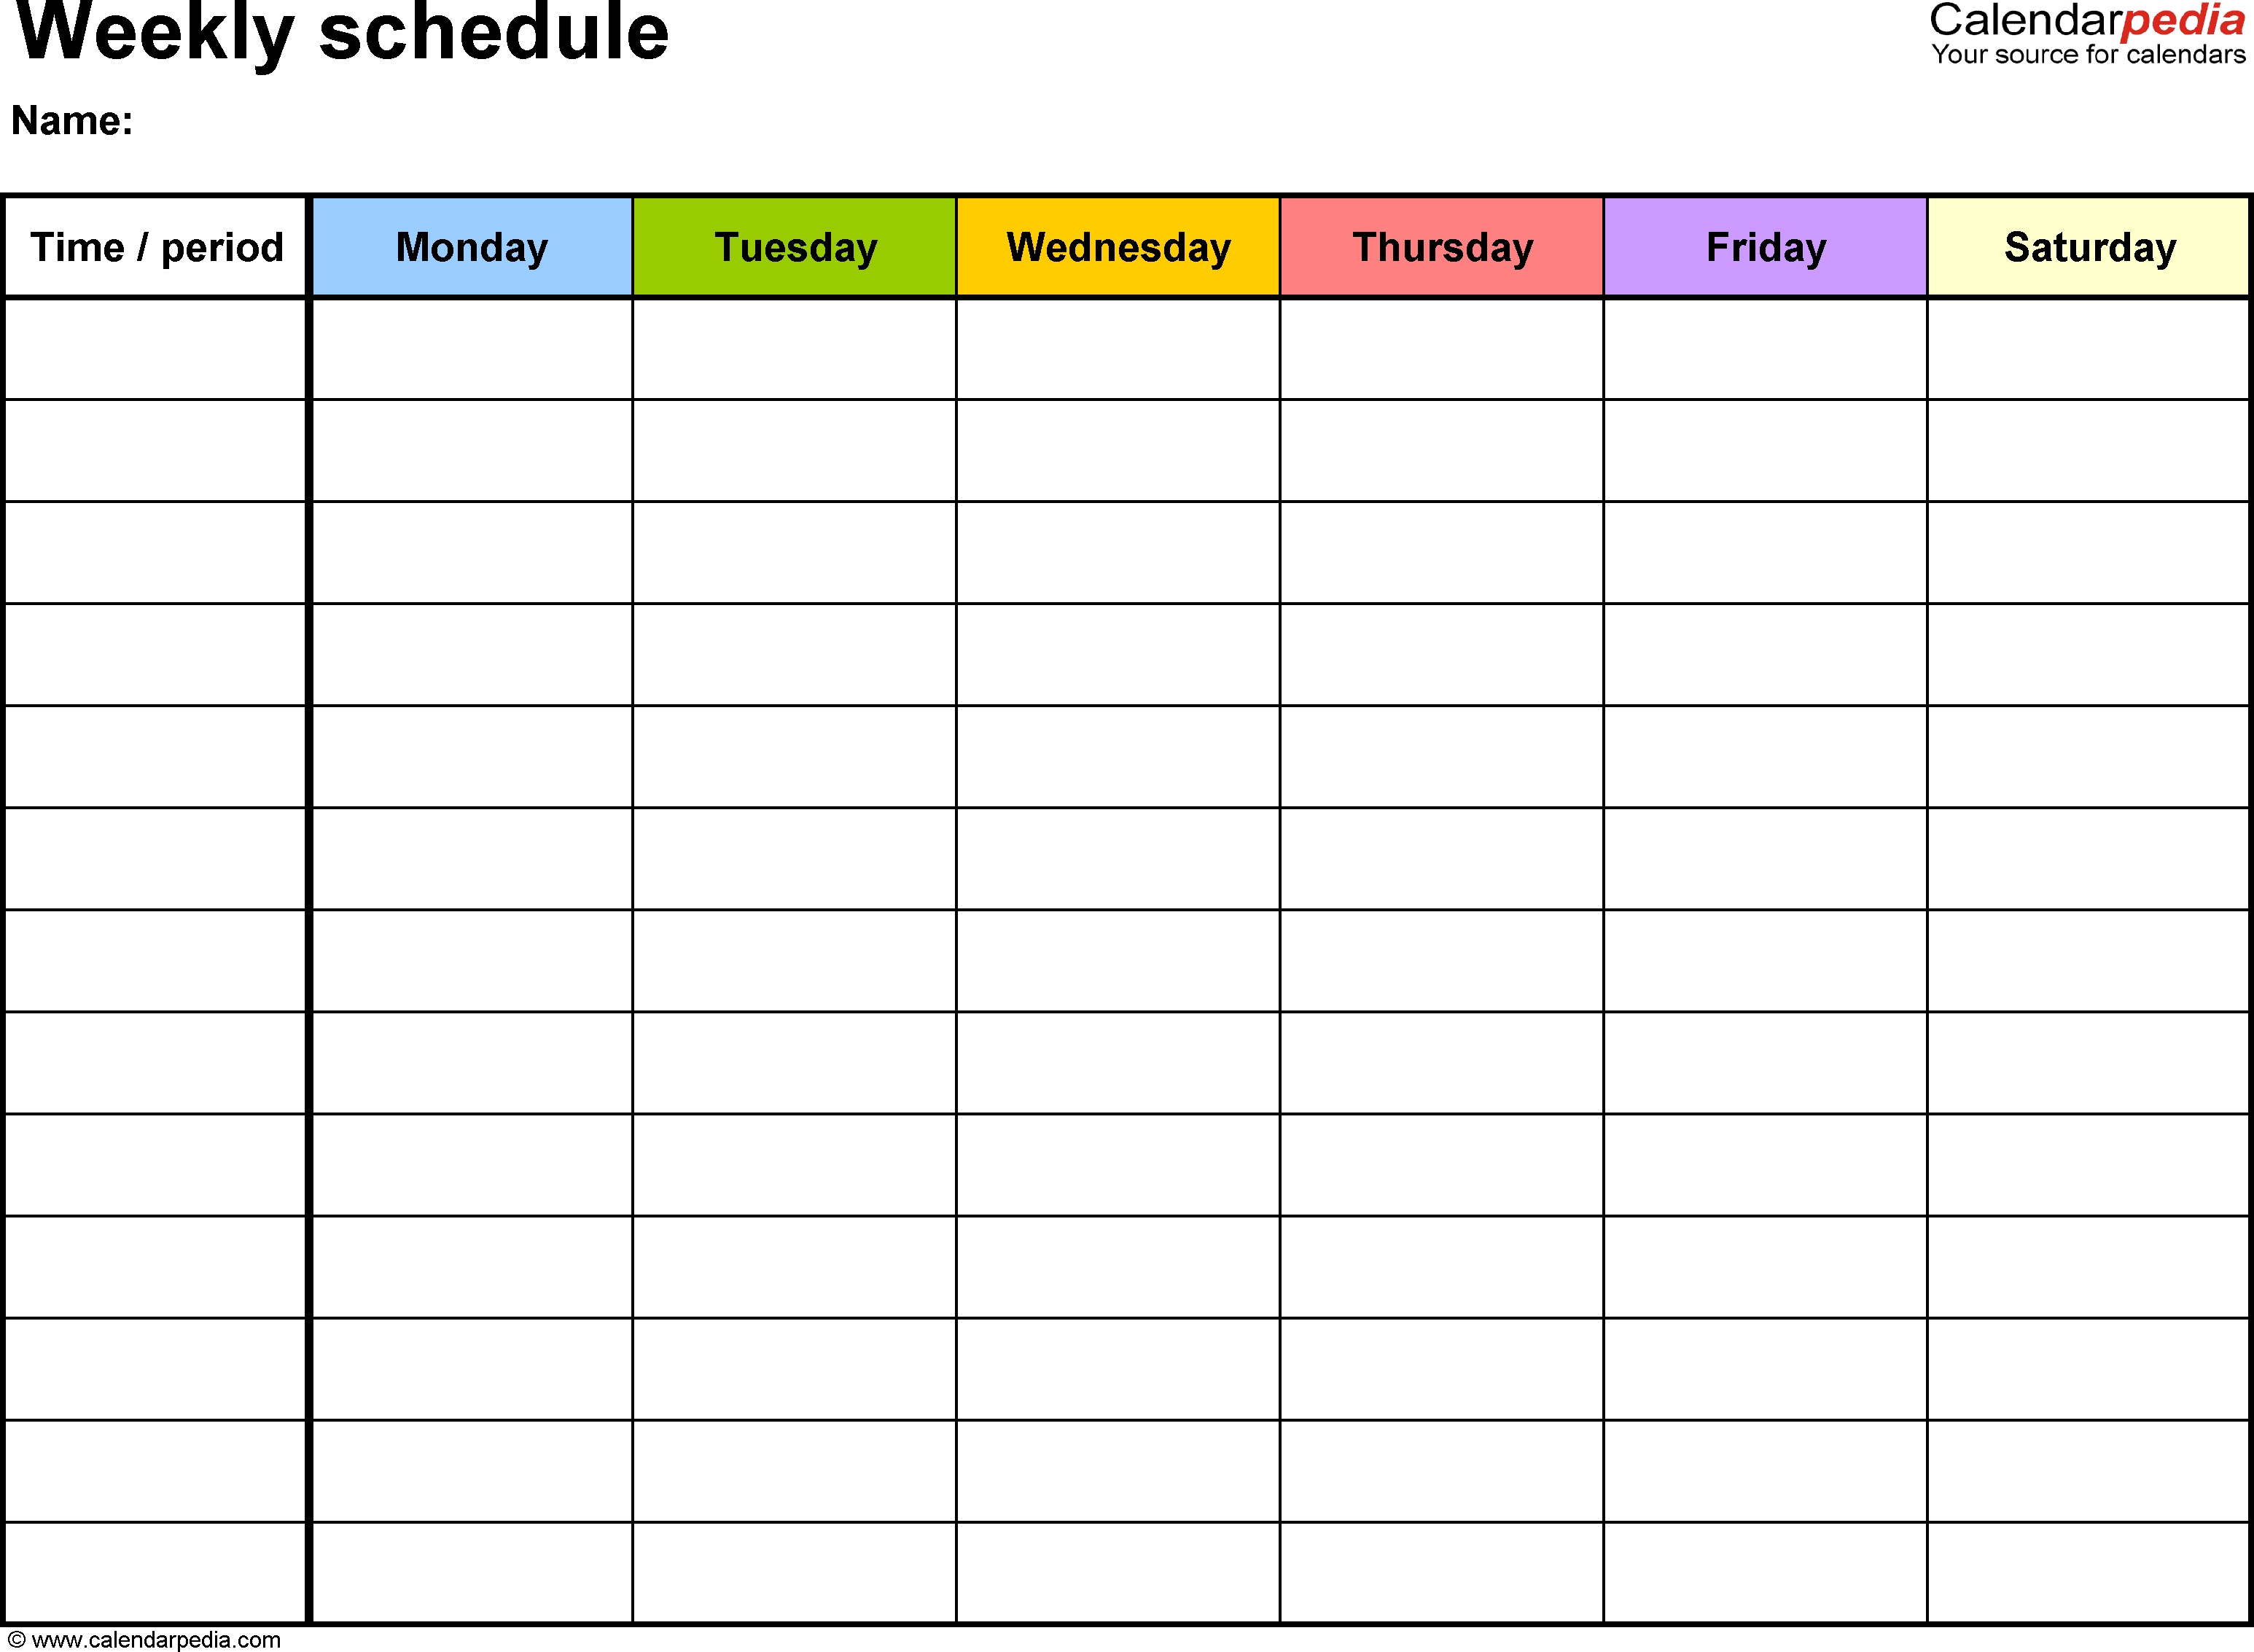 Free Weekly Schedule Templates For Word - 18 Templates within Blank Calendar To Fill In Free